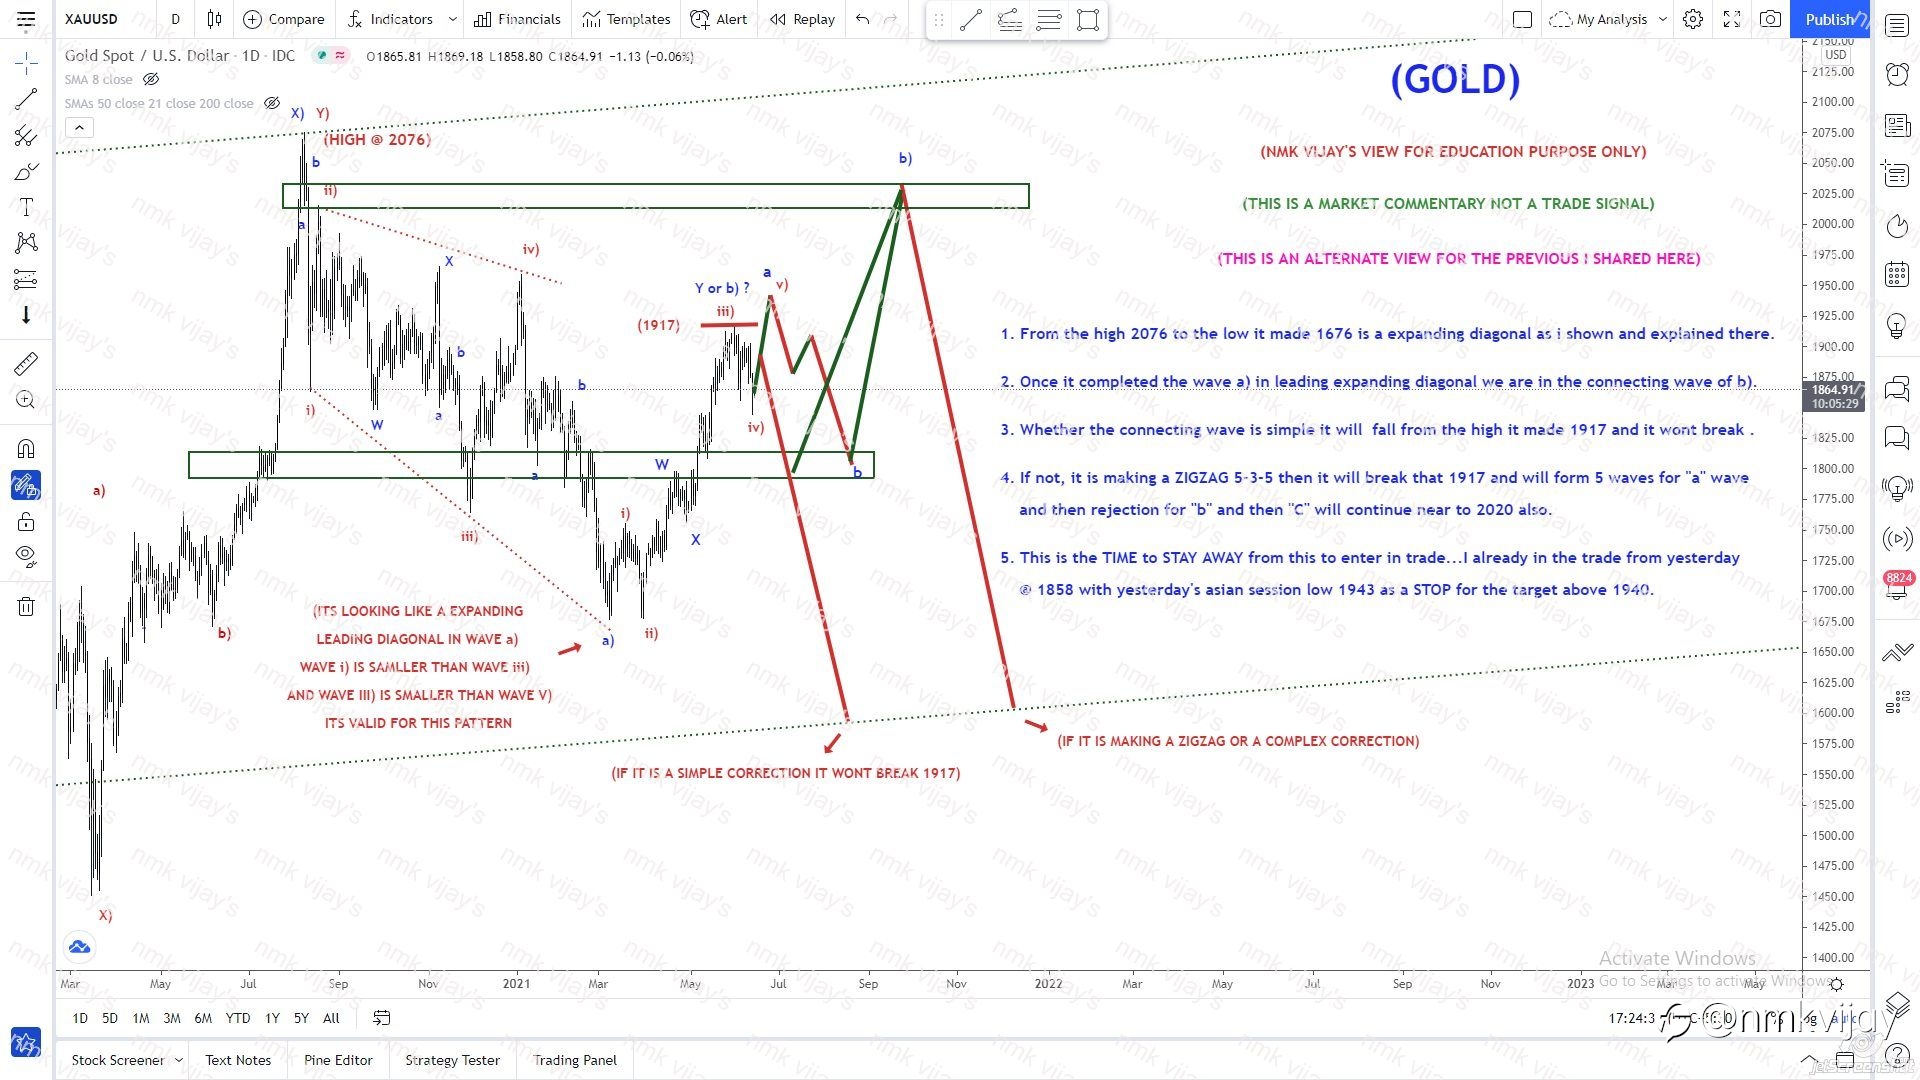 GOLD-Wave a) may be expanding leading diagonal and we are in b)?